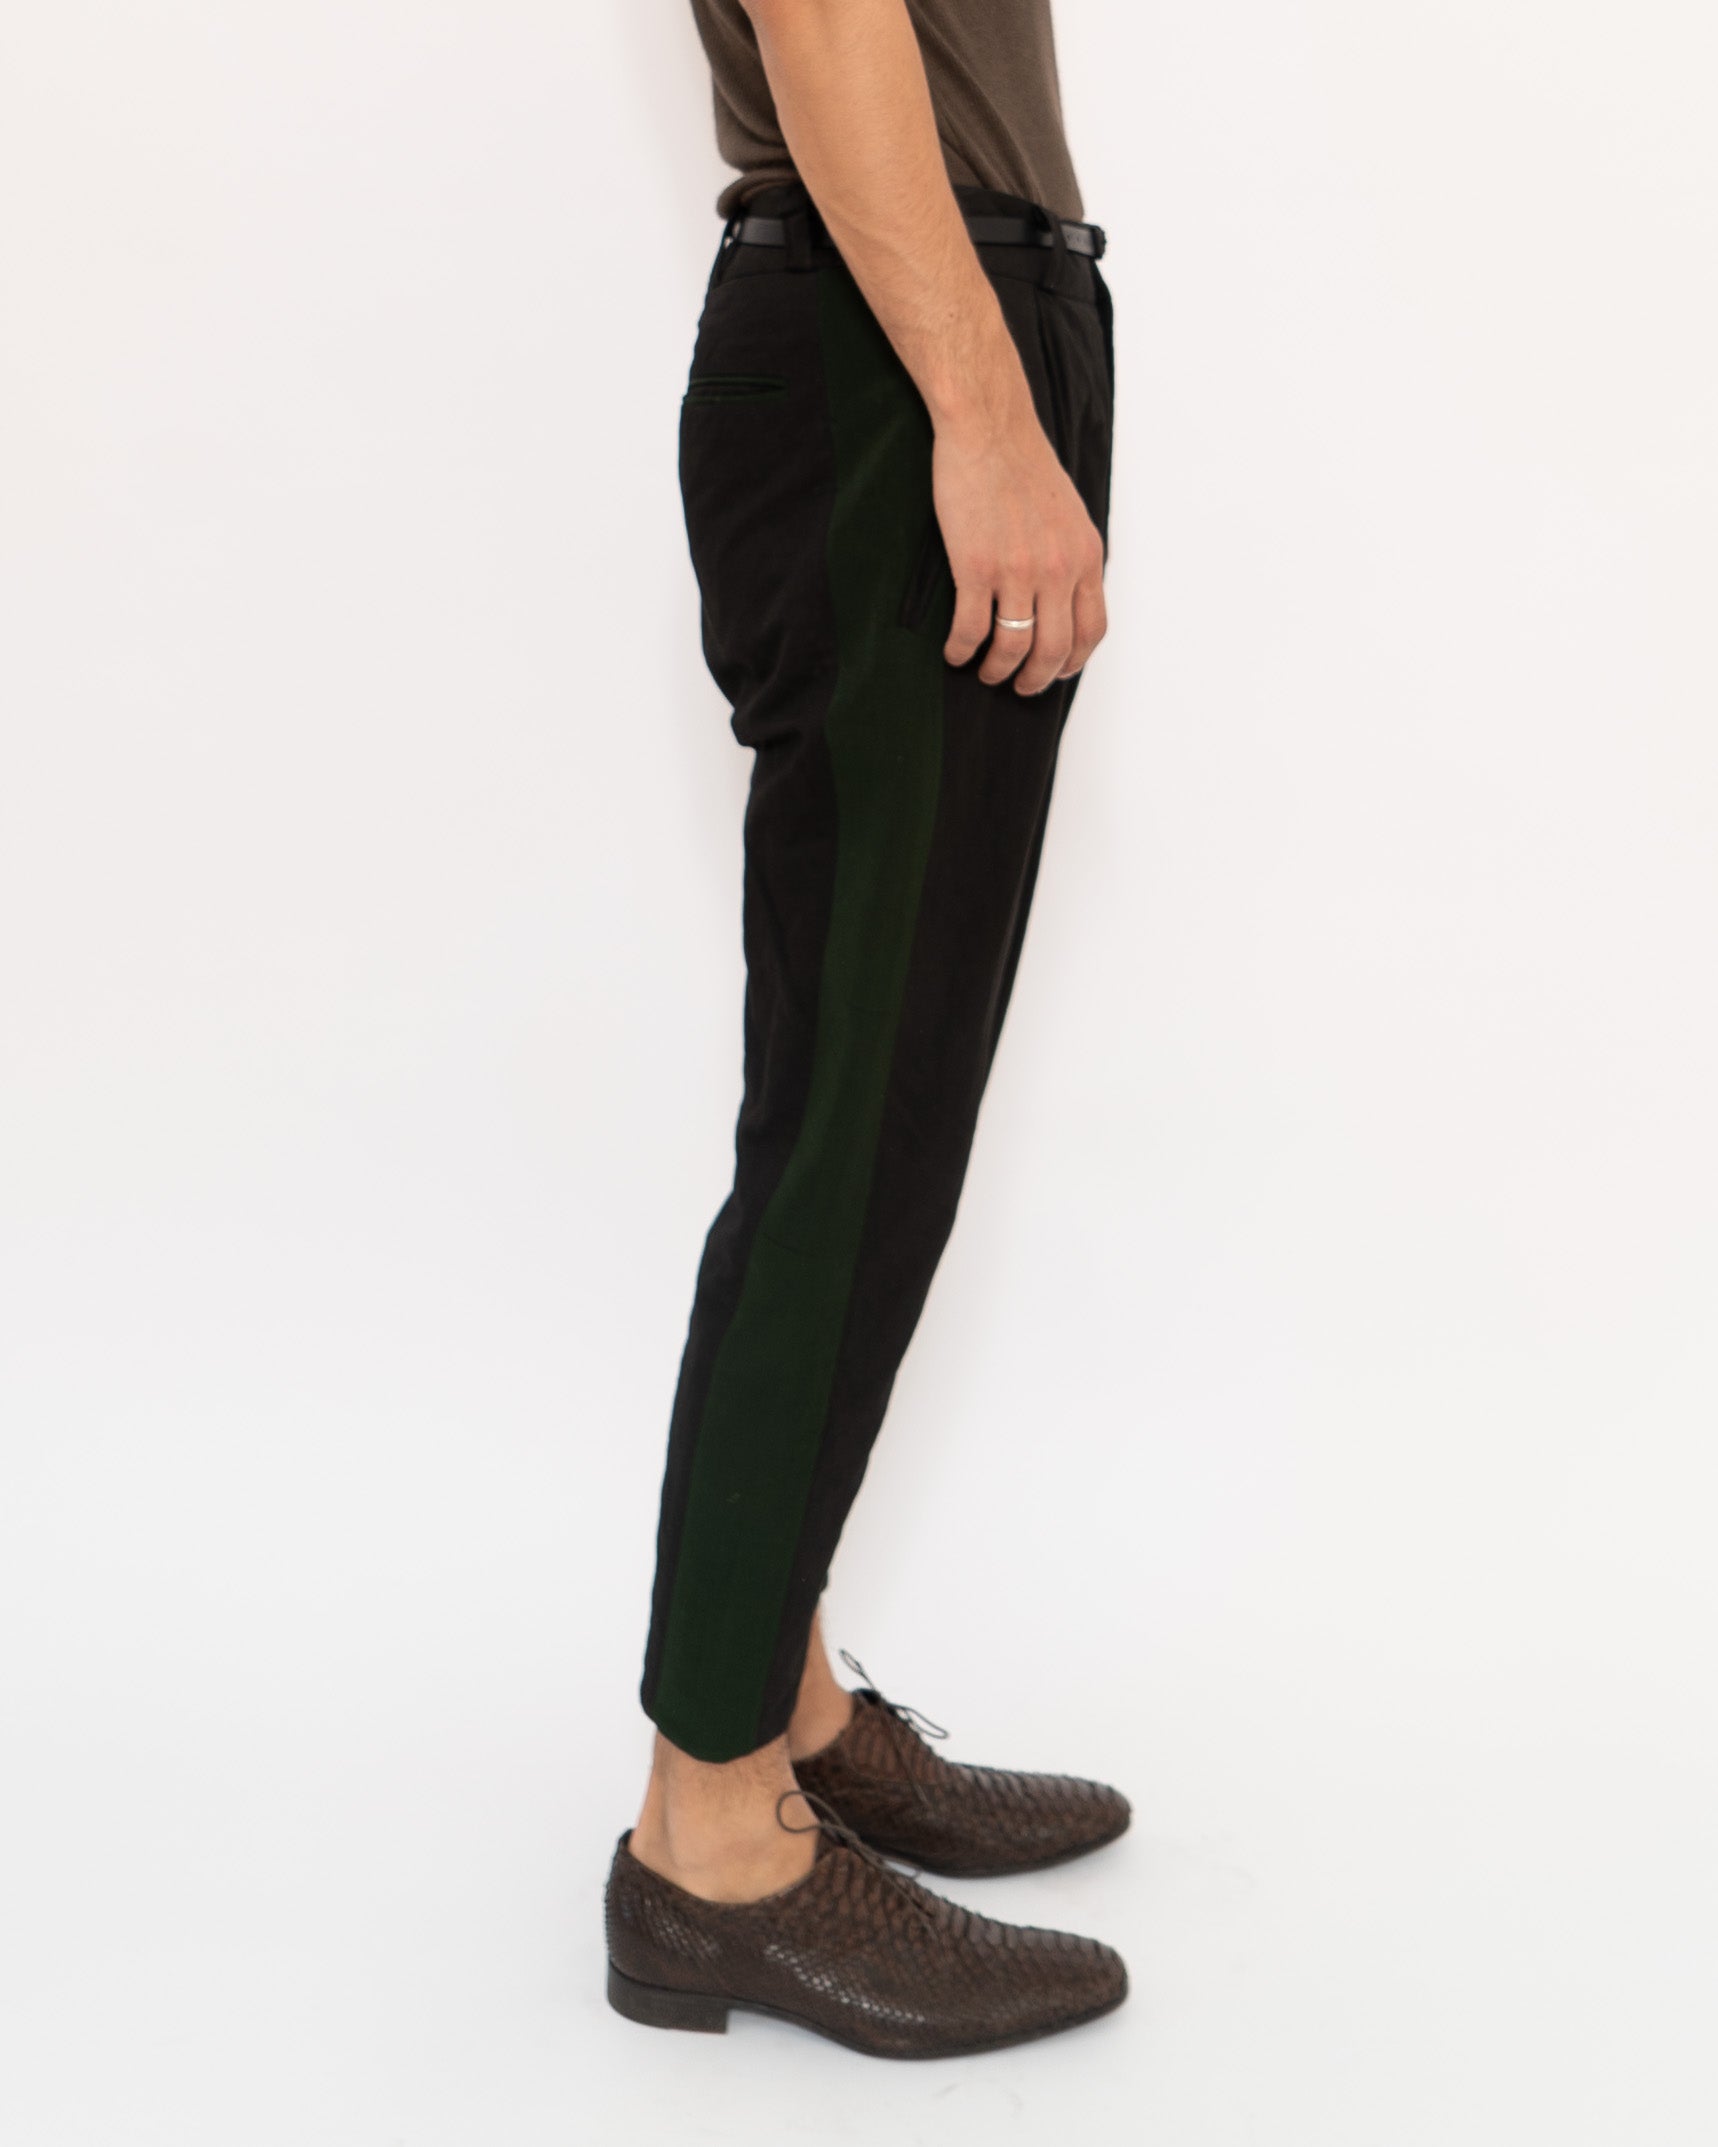 SS14 Bywell Green Striped Trousers Sample